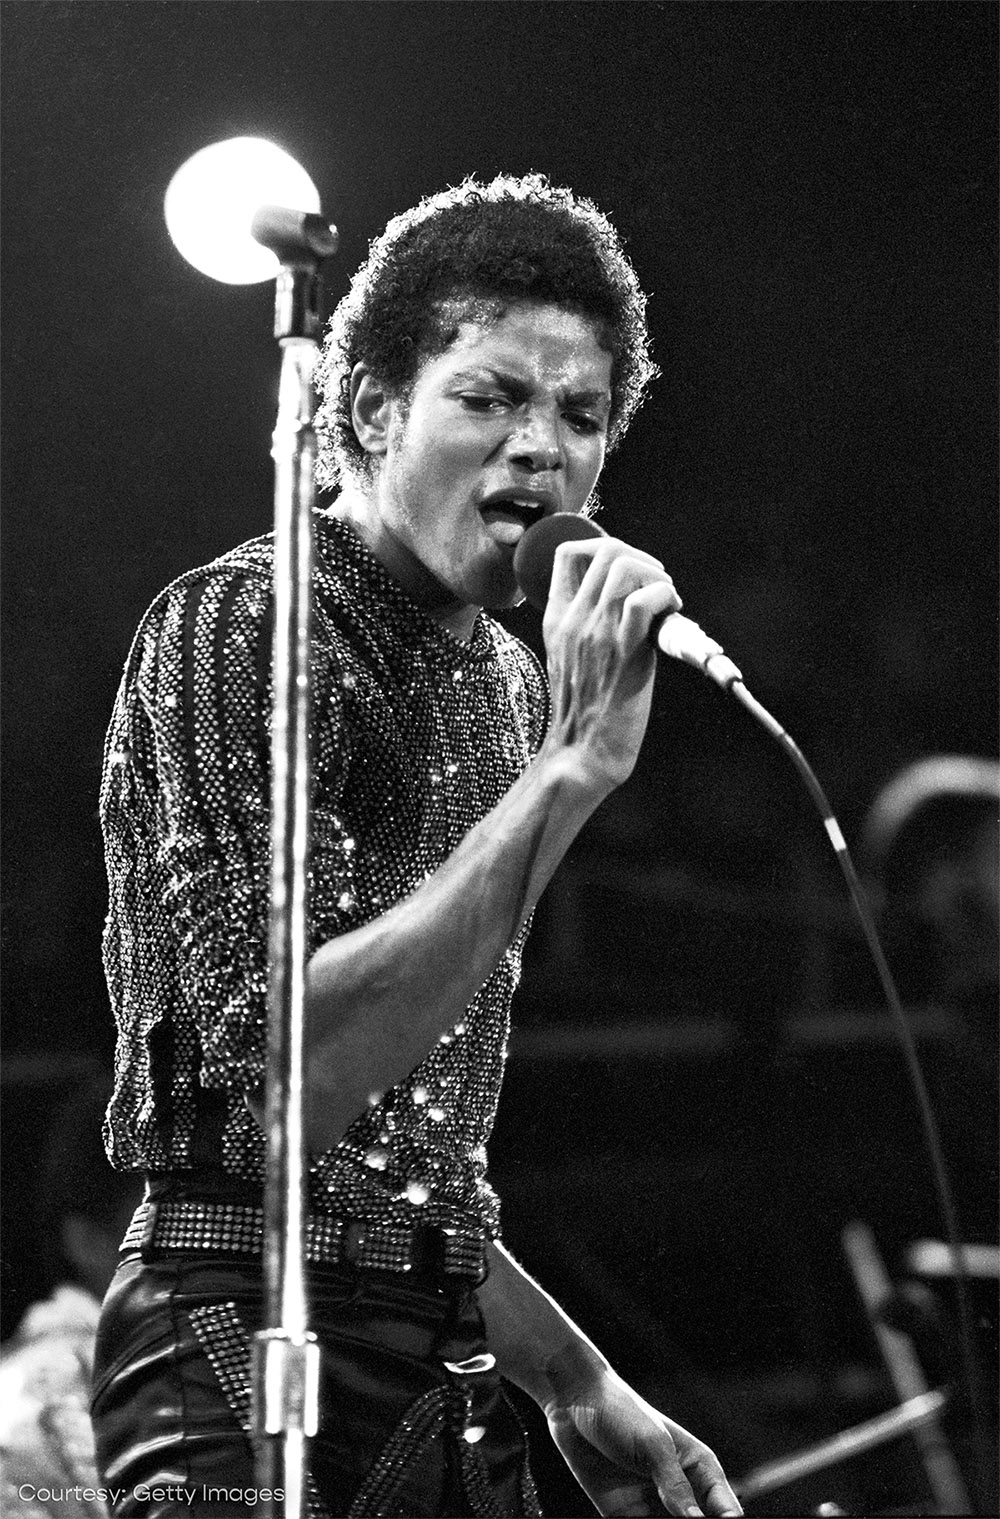 Michael Jackson performs in concert in 1981